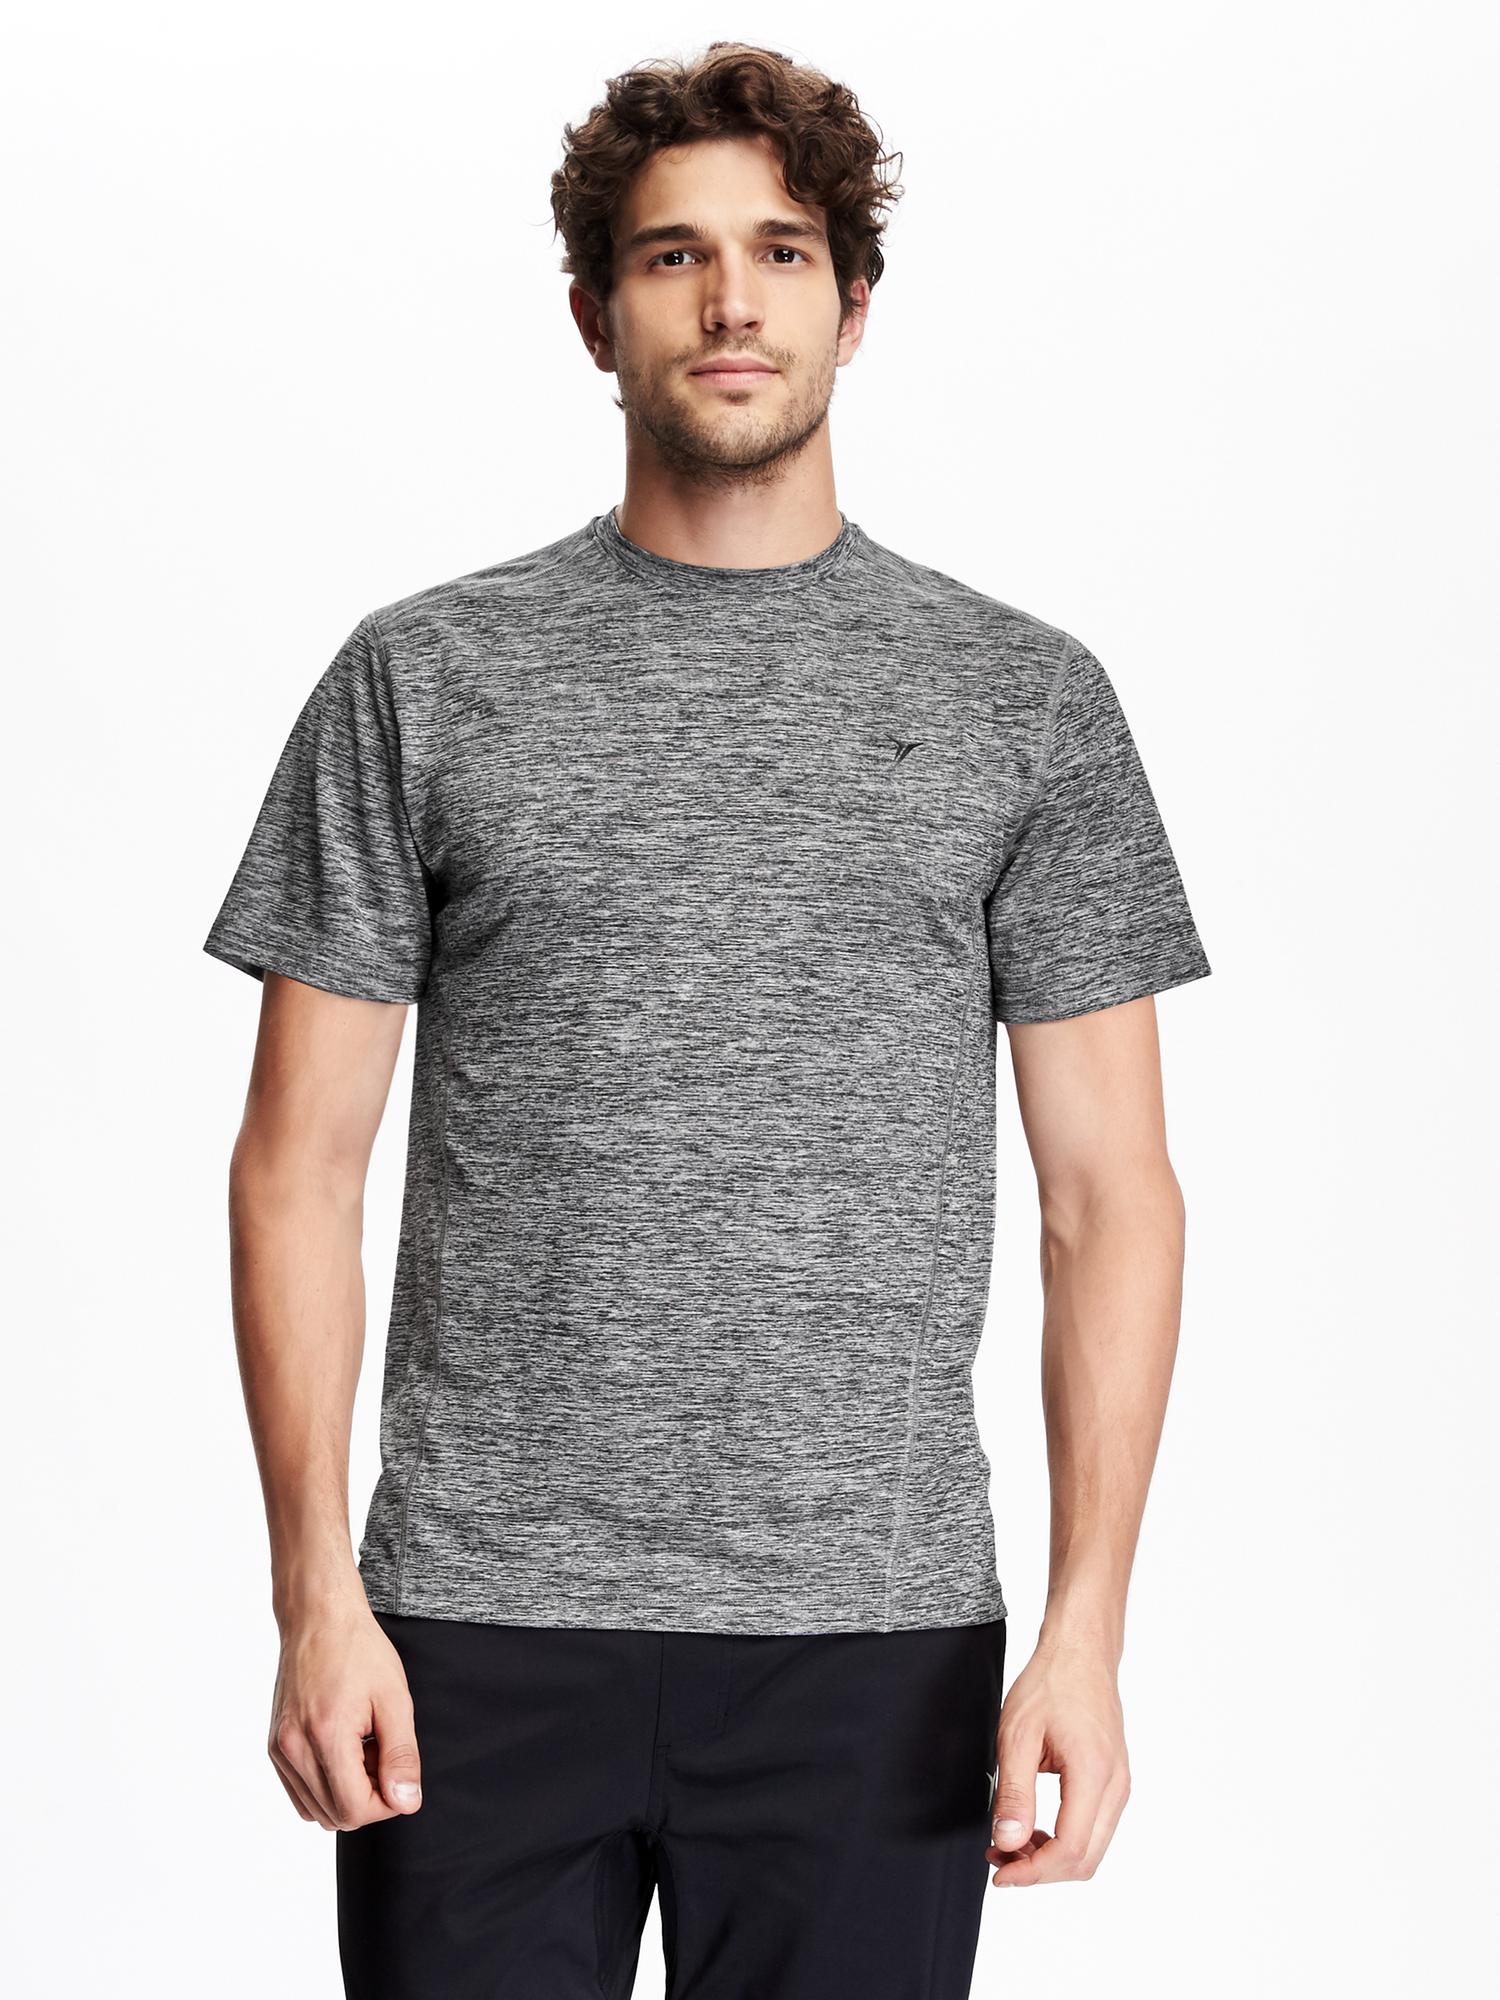 Go-Dry Cool Train Tee for Men | Old Navy